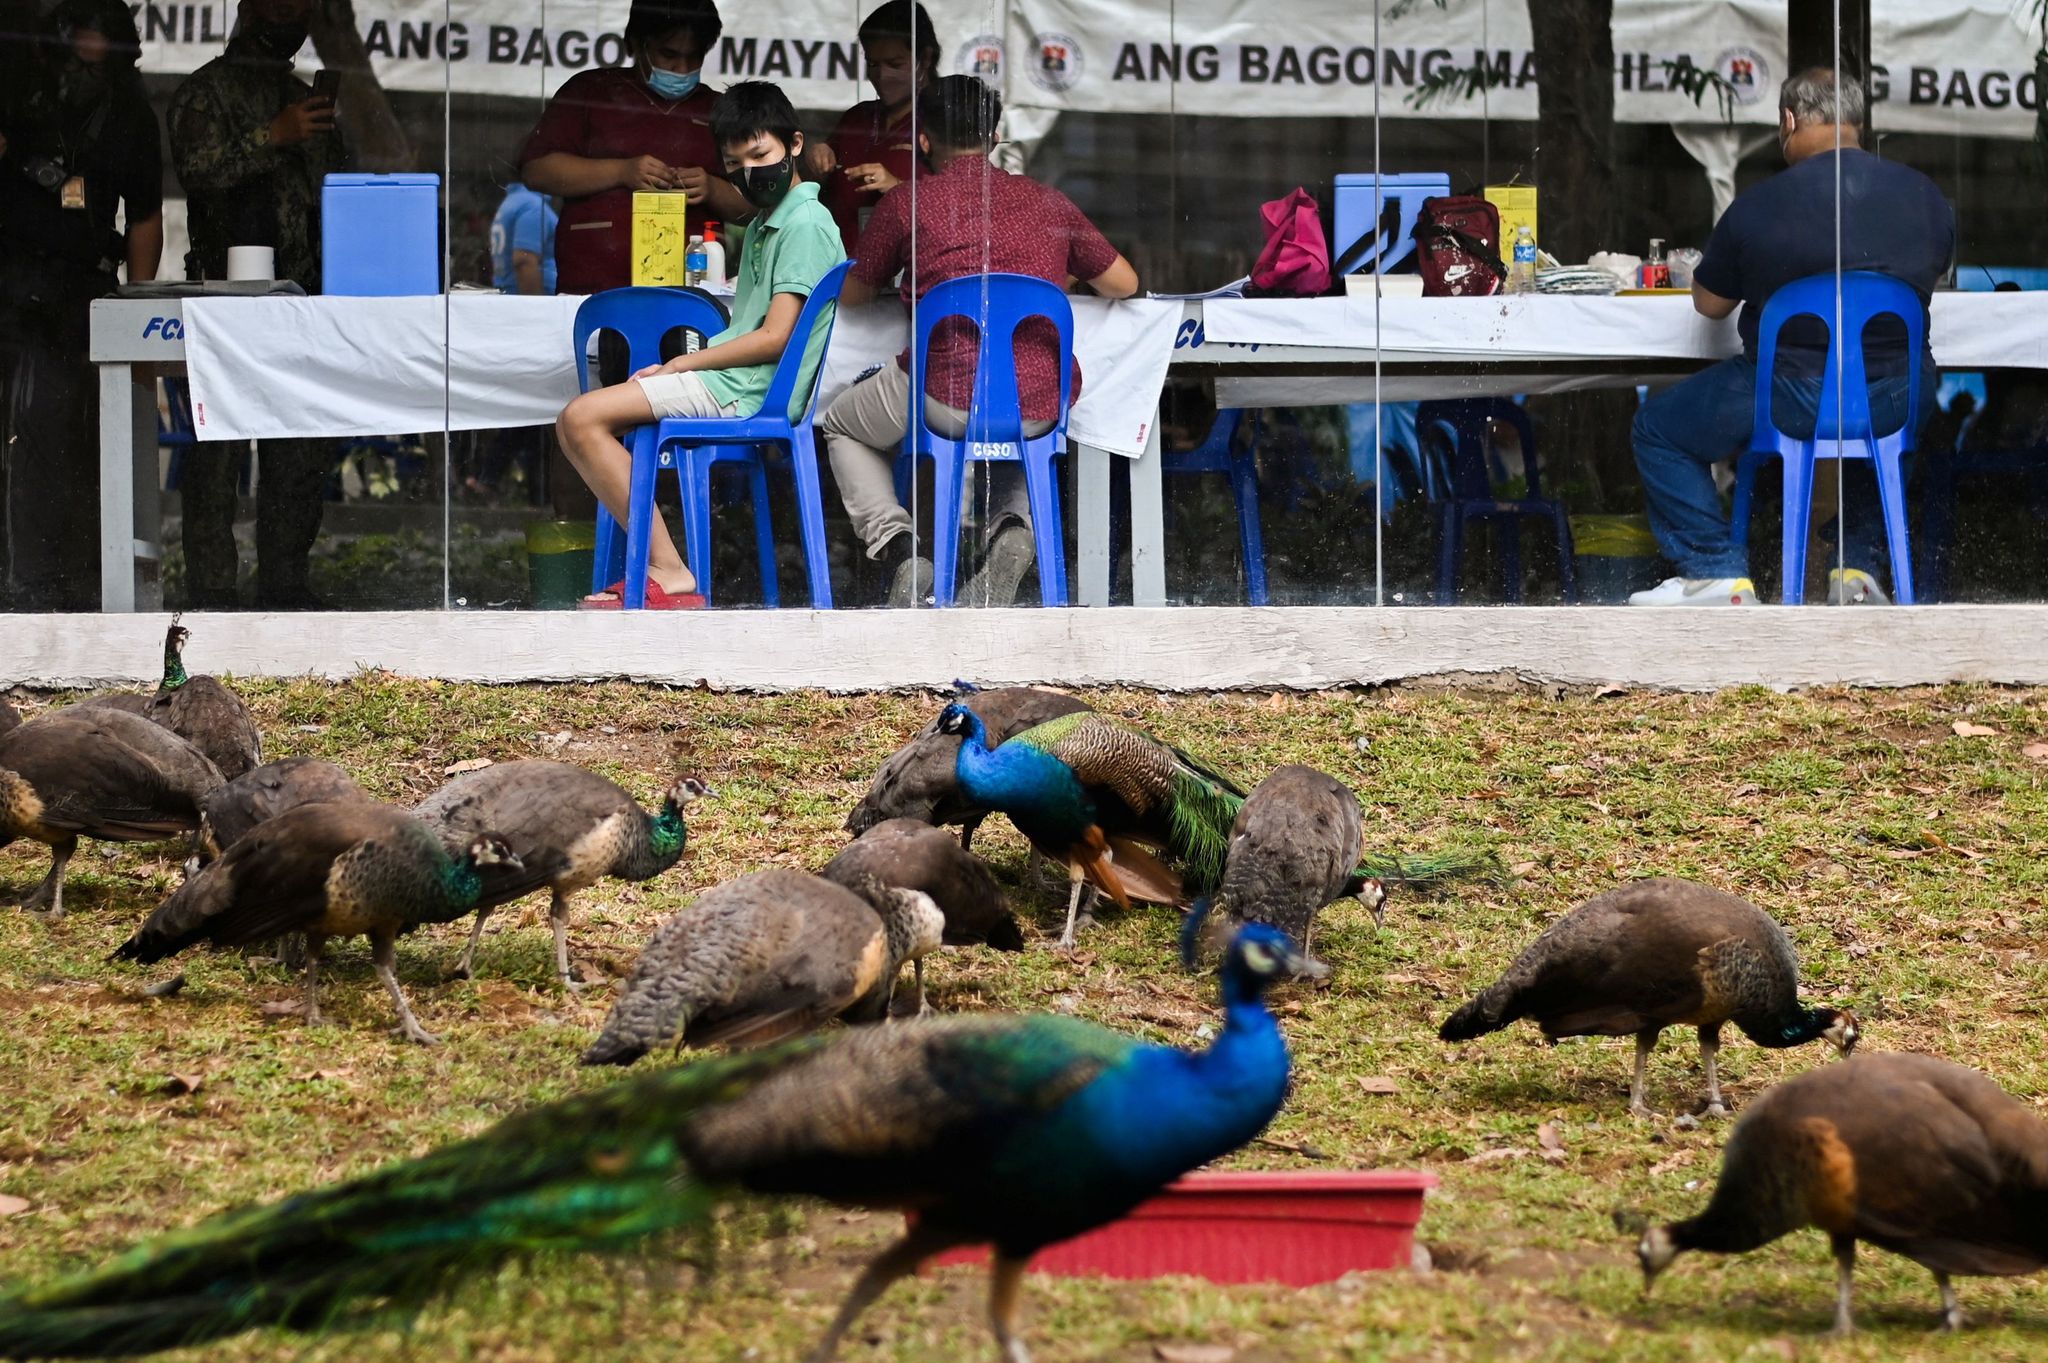 With eagles and elephants, Philippines lures public for 'zoo jabs'